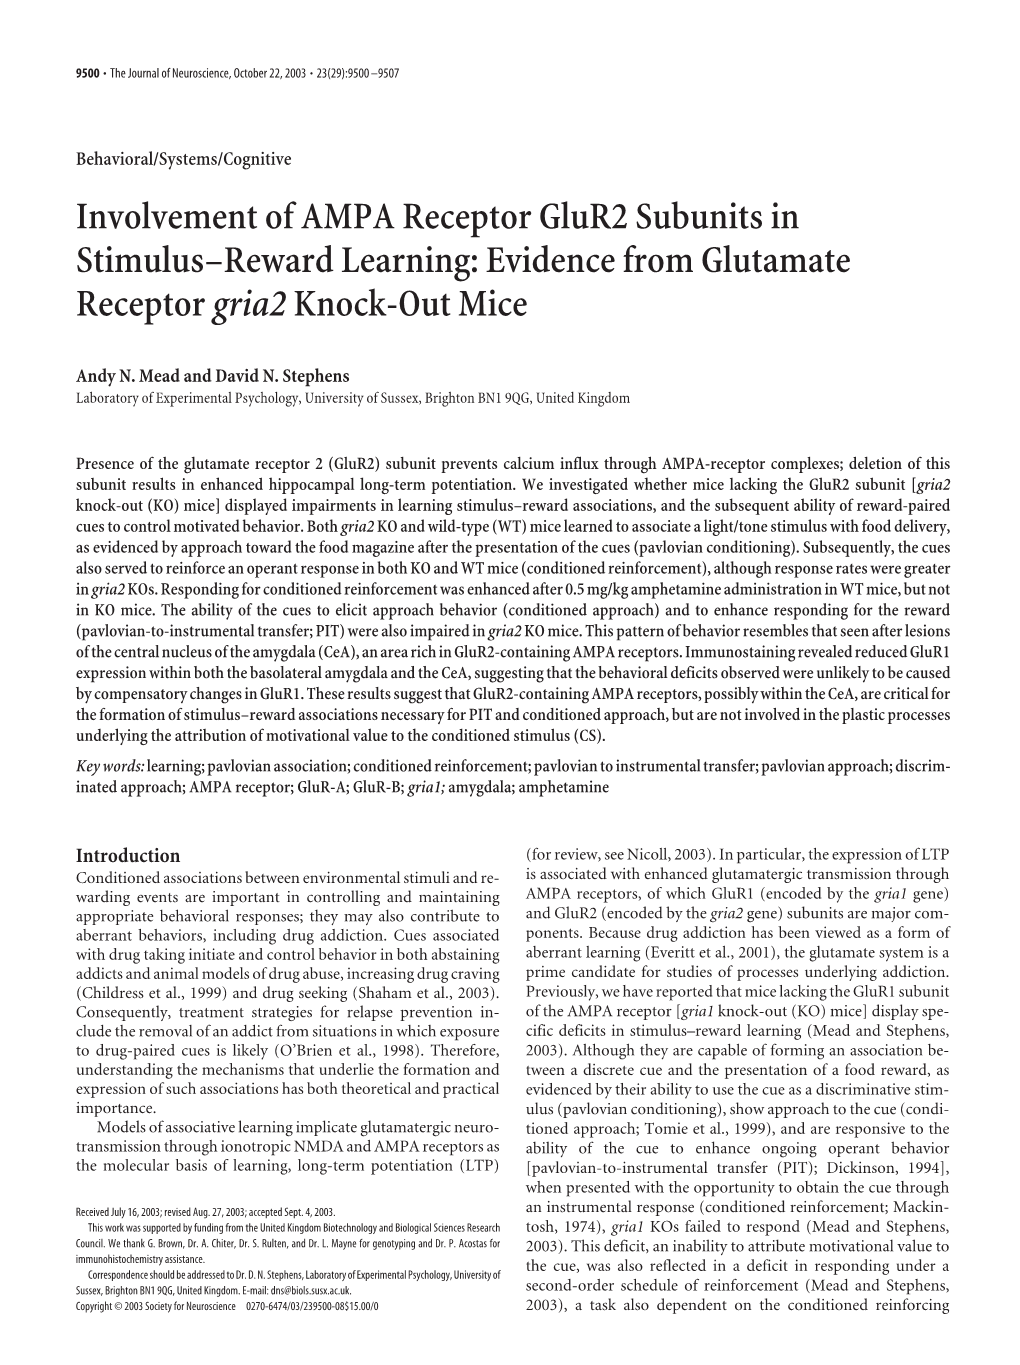 Involvement of AMPA Receptor Glur2 Subunits in Stimulus–Reward Learning: Evidence from Glutamate Receptor Gria2 Knock-Out Mice